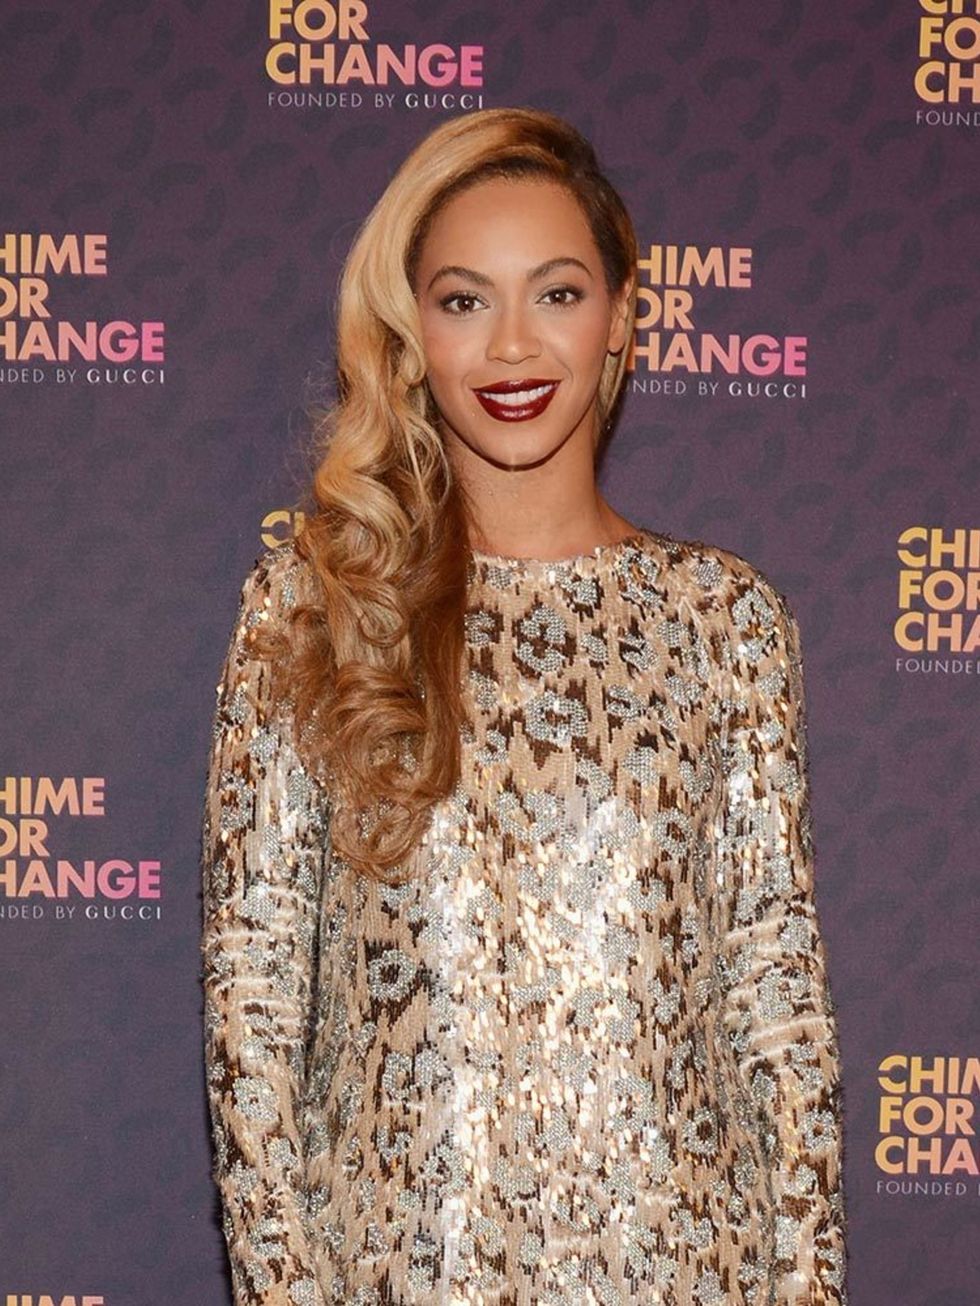 <p><a href="http://www.elleuk.com/fashion/celebrity-style/beyonce-s-style-file">Beyoncé</a></p>

<p>'We have a lot of work to do, but we can get there if we work together. Women are more than 50 percent of the population and more than 50 percent of voters